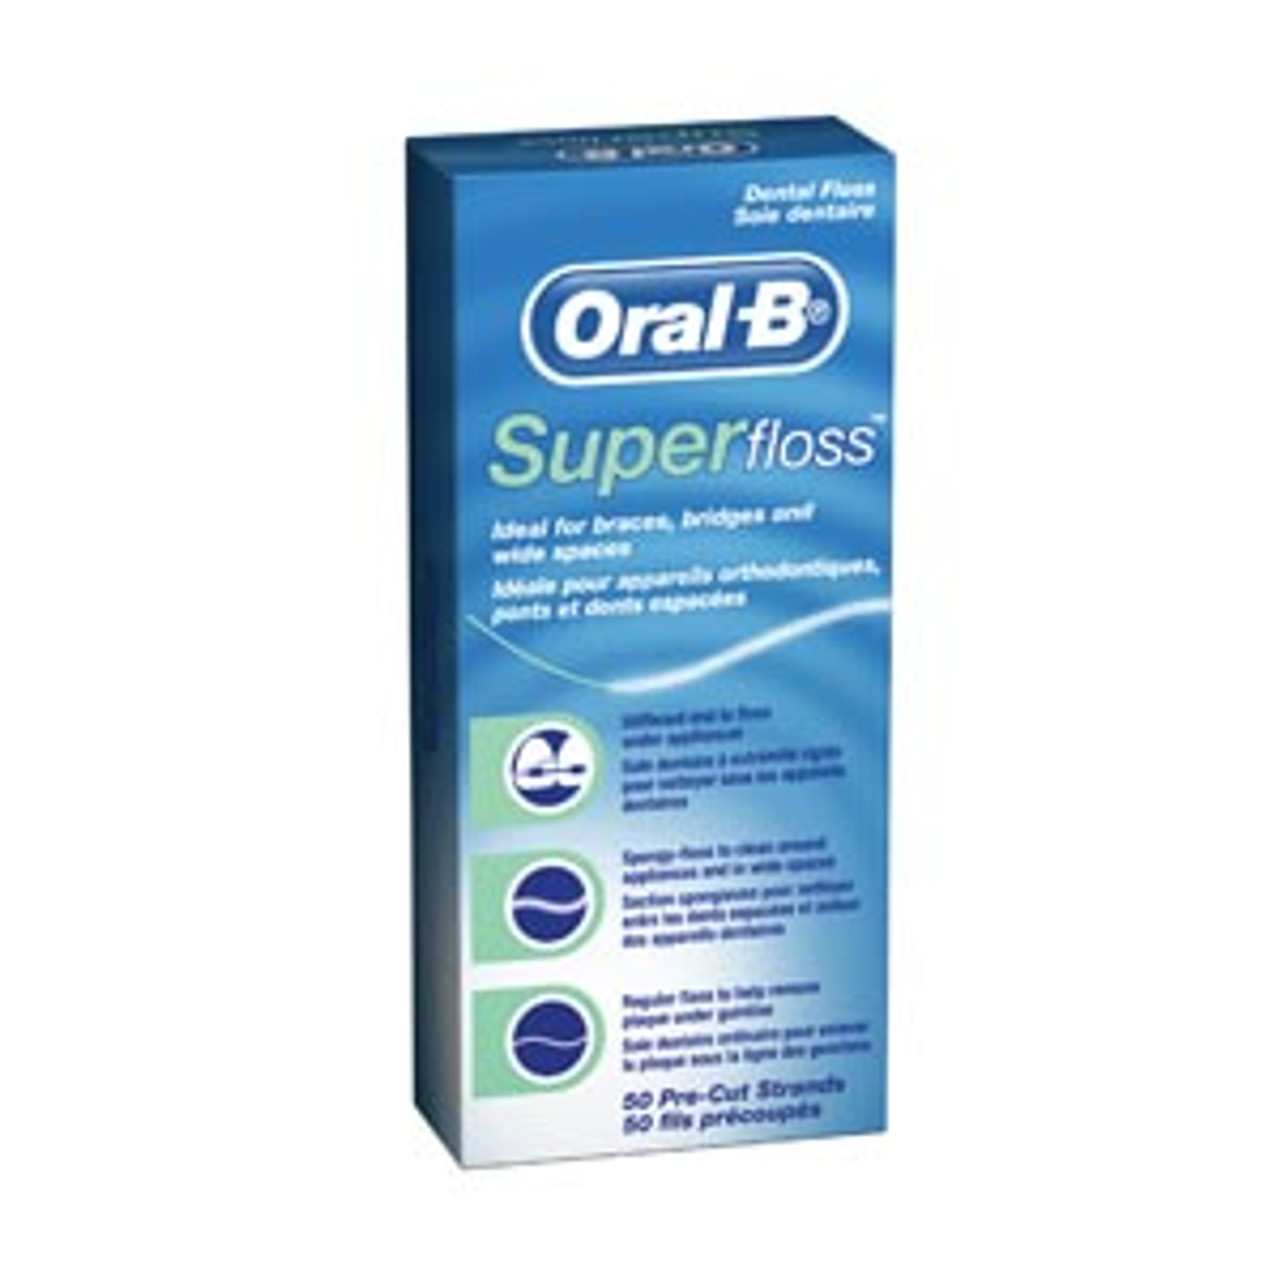 P&G ORAL-B SUPERFLOSS, 80721154 (formerly 84855870)